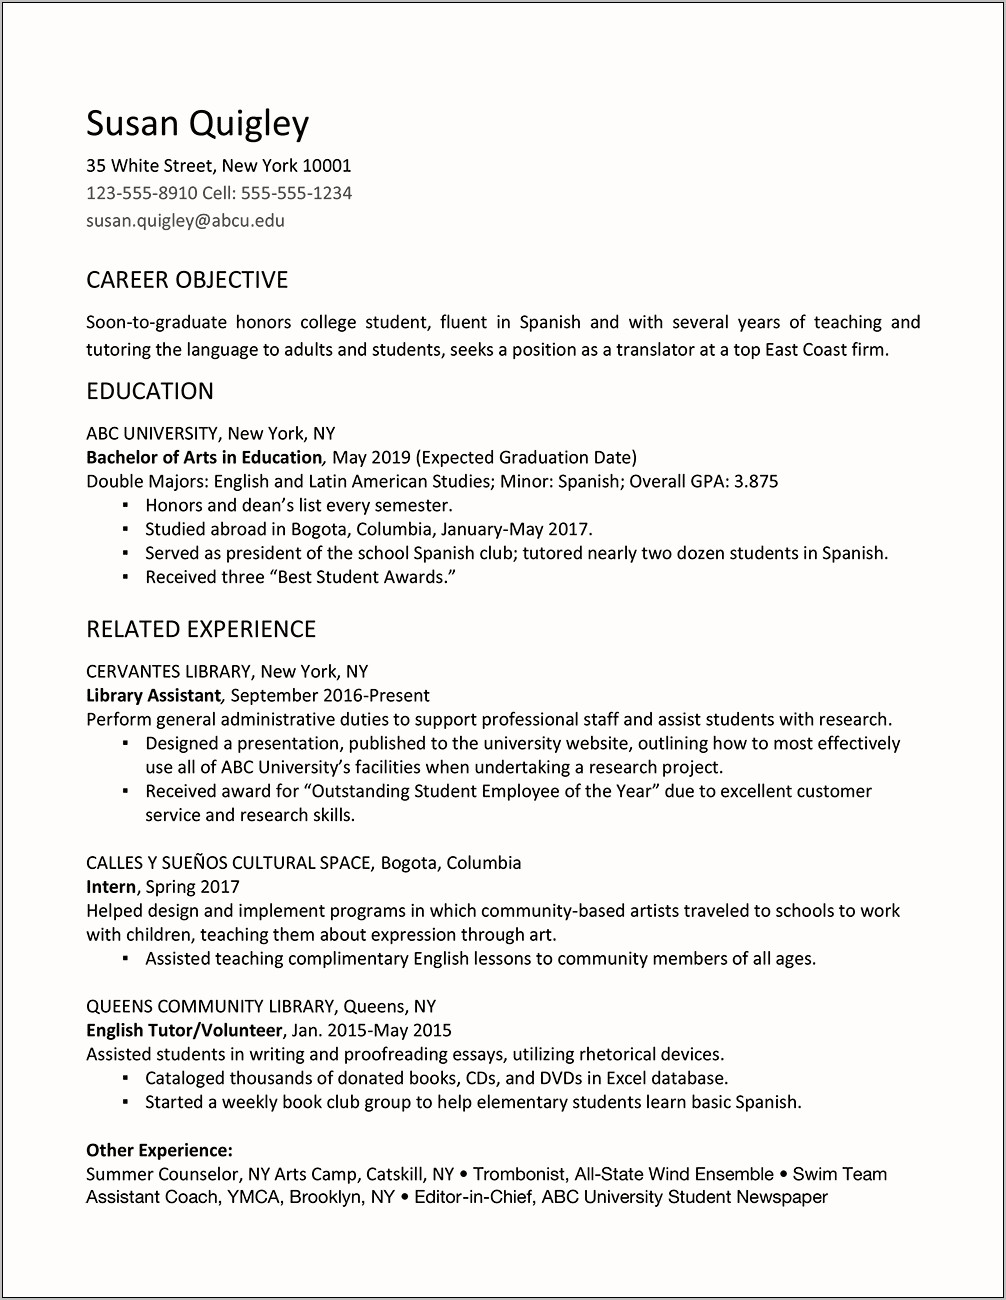 Resume Wording For Planned Graduation Date